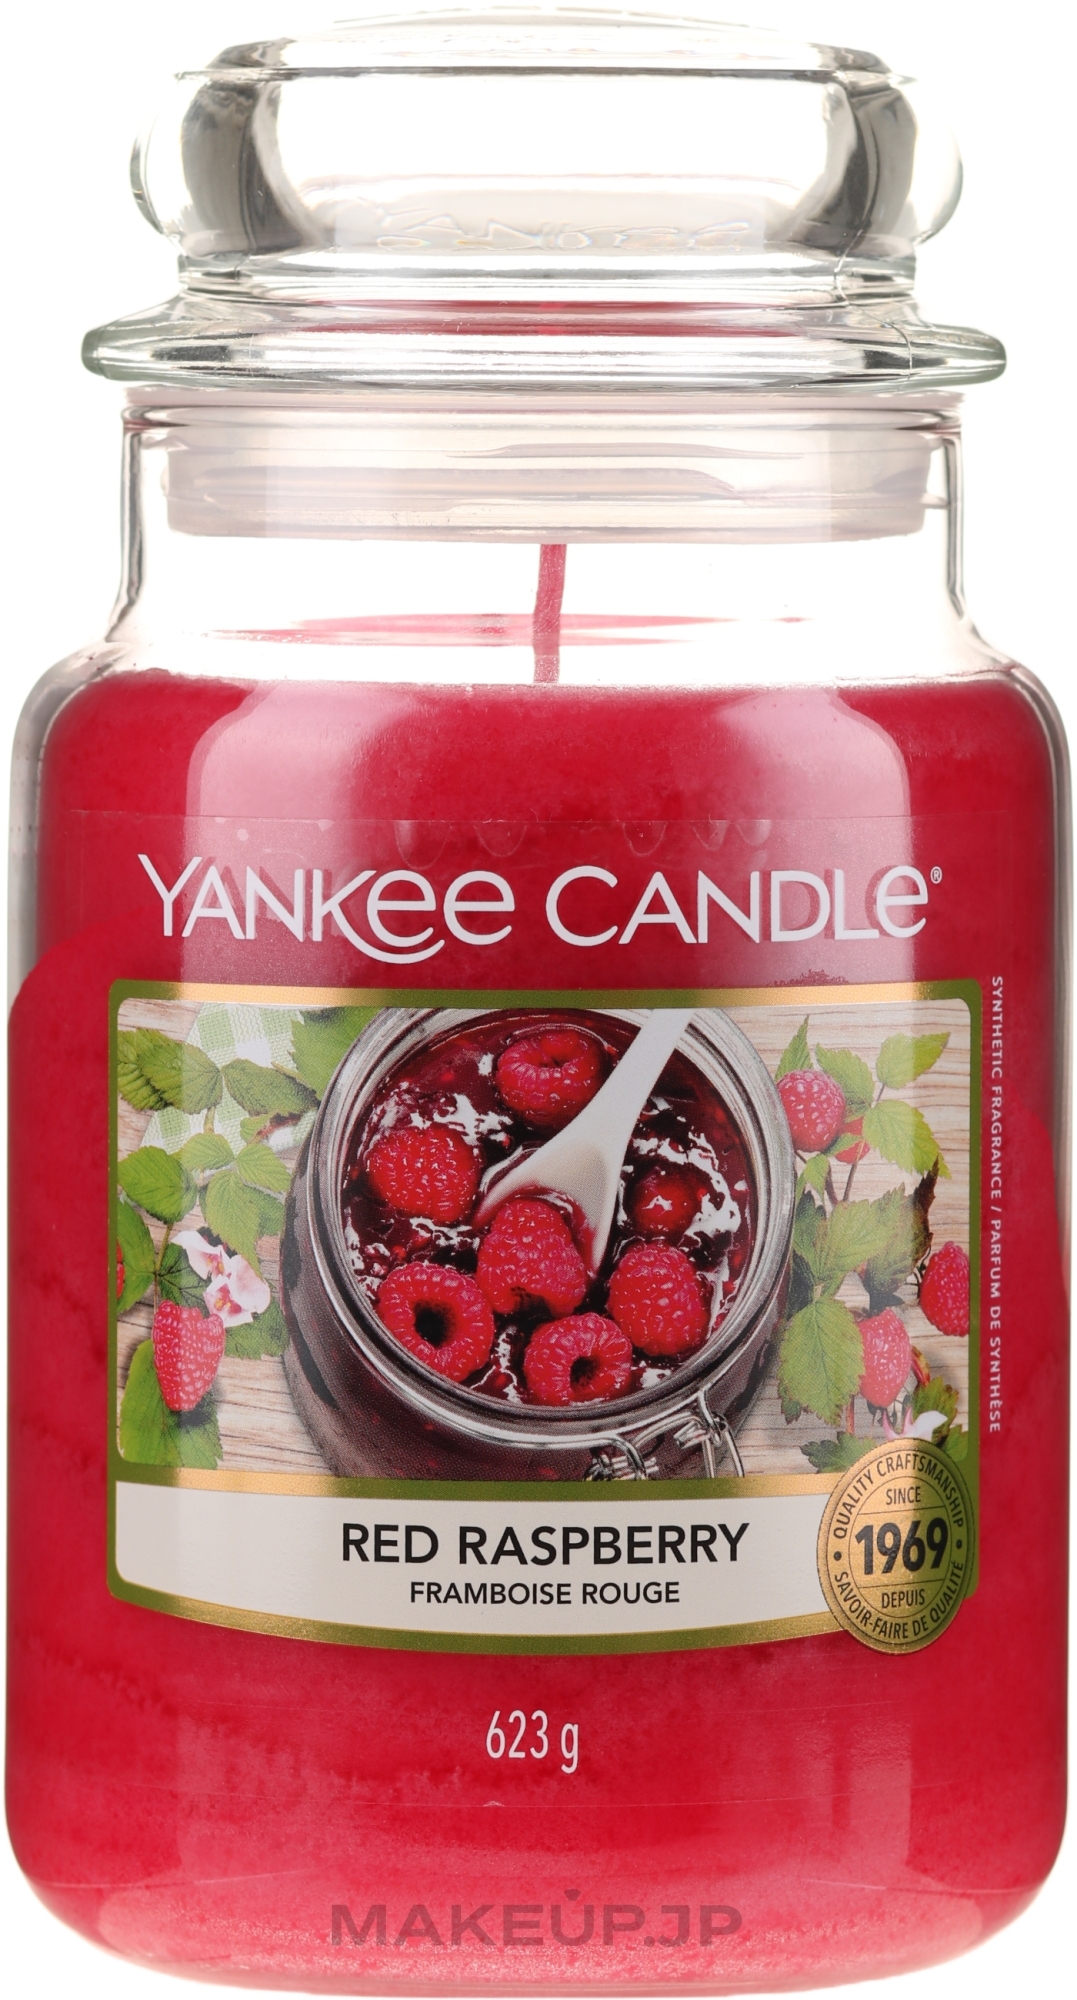 Candle in Glass Jar - Yankee Candle Red Raspberry  — photo 623 g